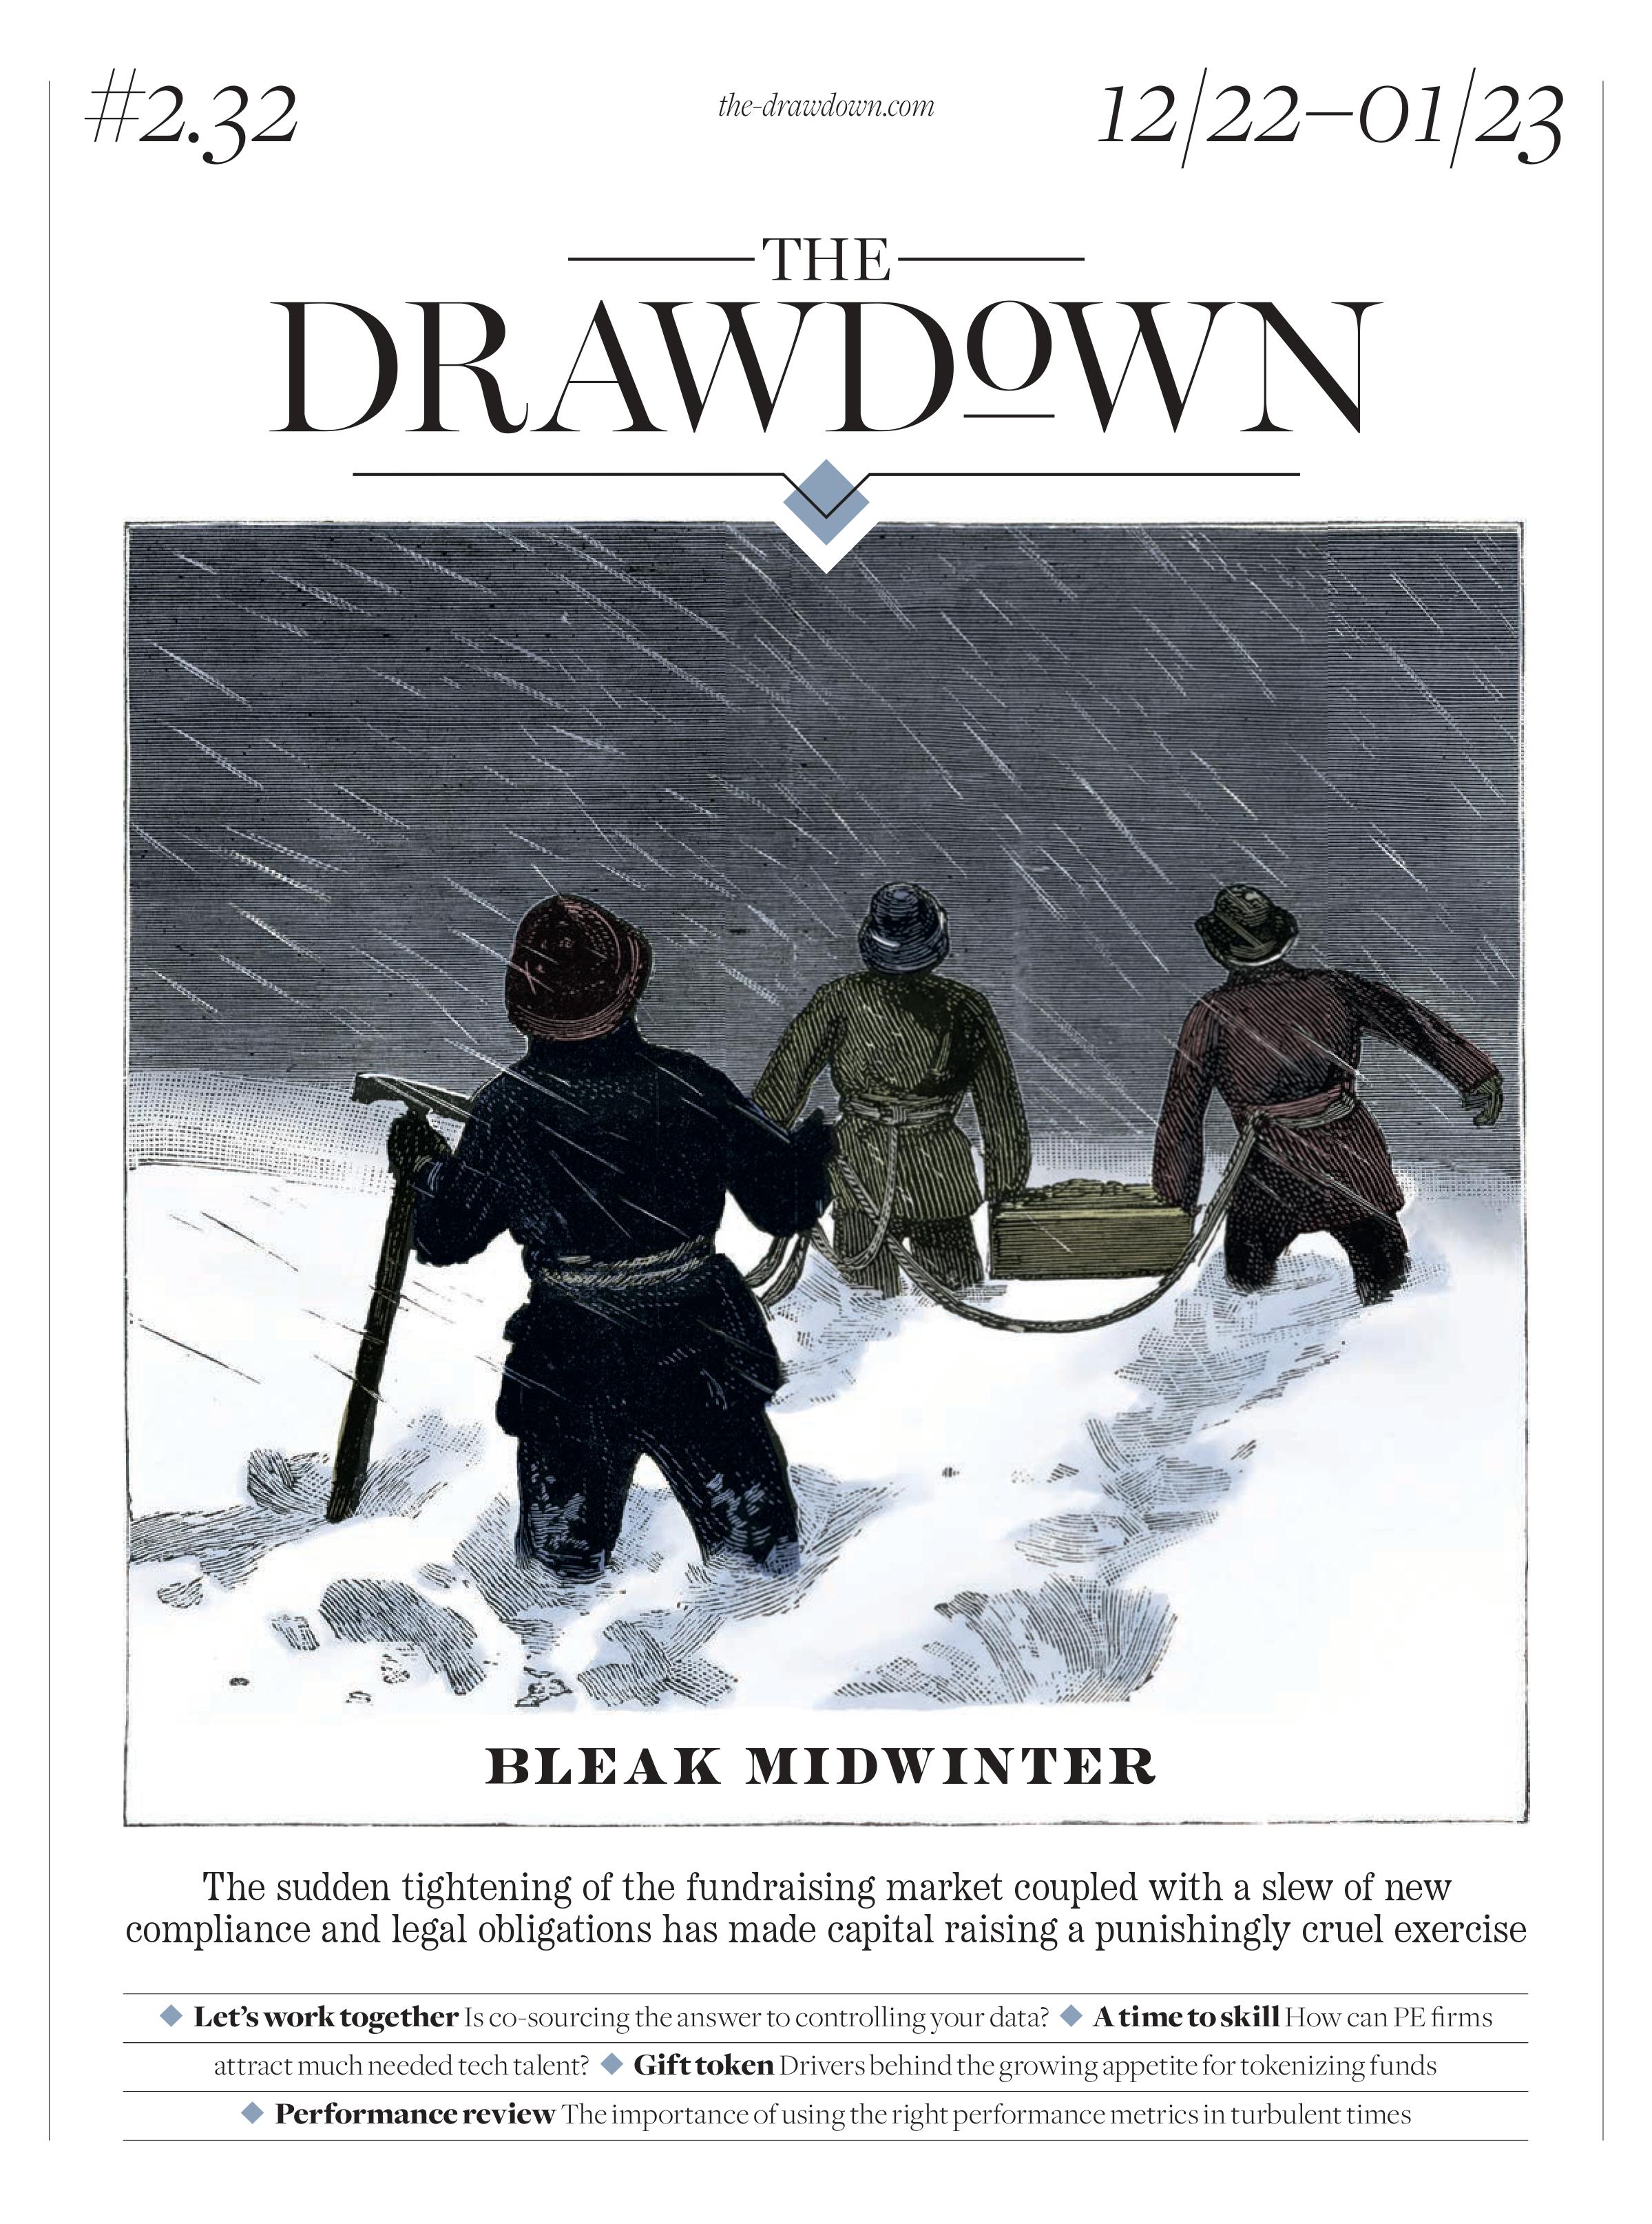 The Drawdown Issue December 2022 / January 2023 Cover